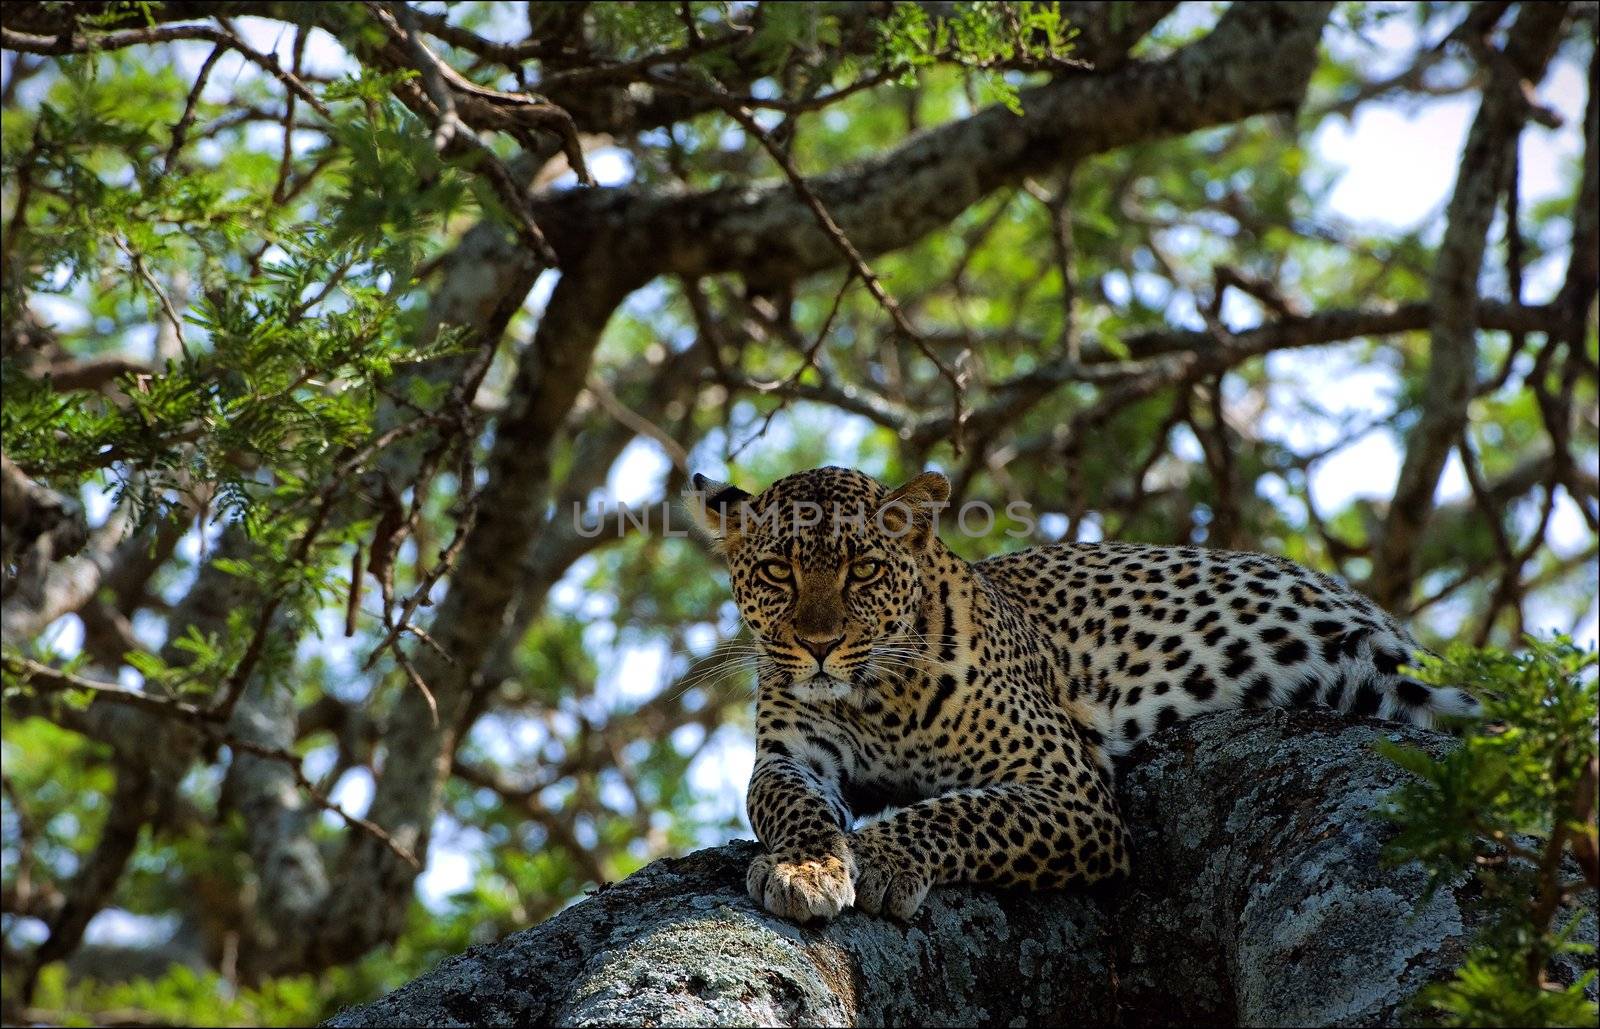 Leopard on a tree. The leopard lies on a tree branch, having hidden in a shade from the hot sun.